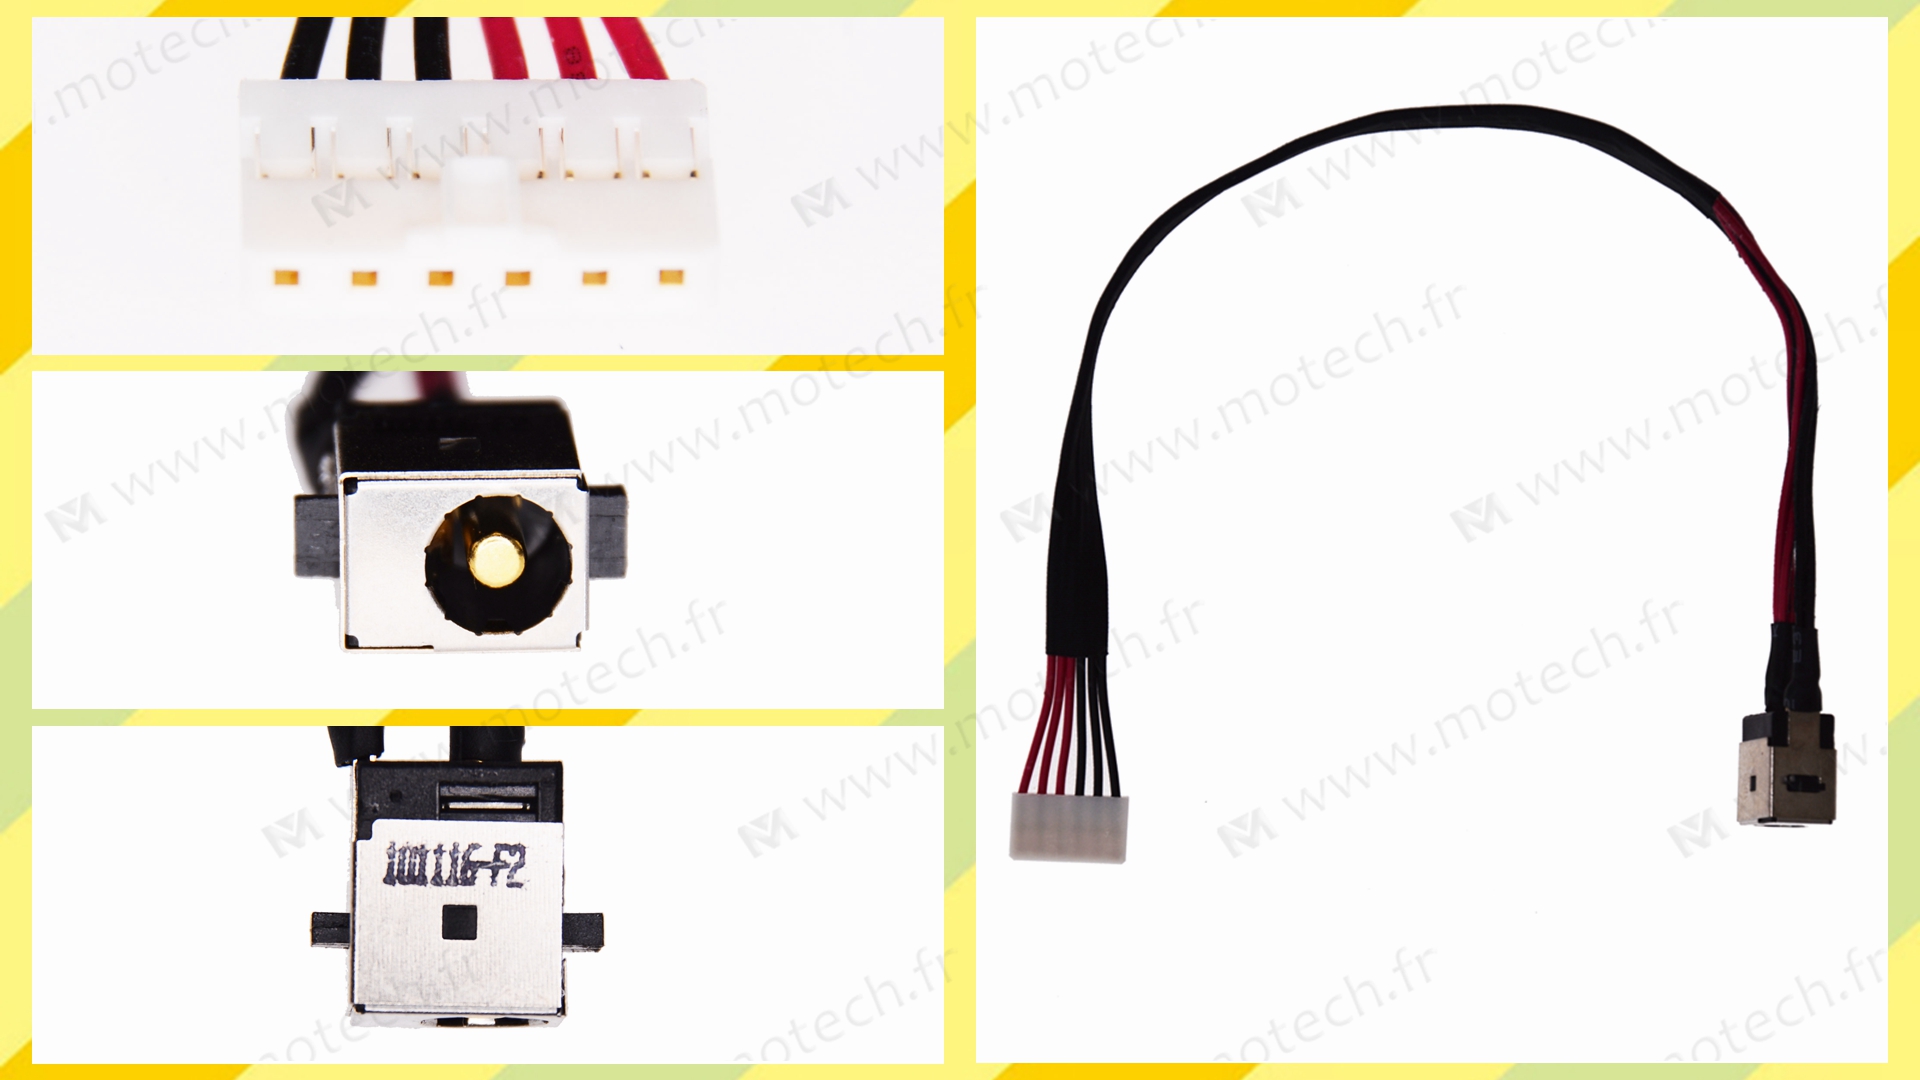 Asus S550CB charging connector, Asus S550CB DC Power Jack, Asus S550CB DC IN Cable, Asus S550CB Power Jack, Asus S550CB plug, Asus S550CB Jack socket, Asus S550CB connecteur de charge, 